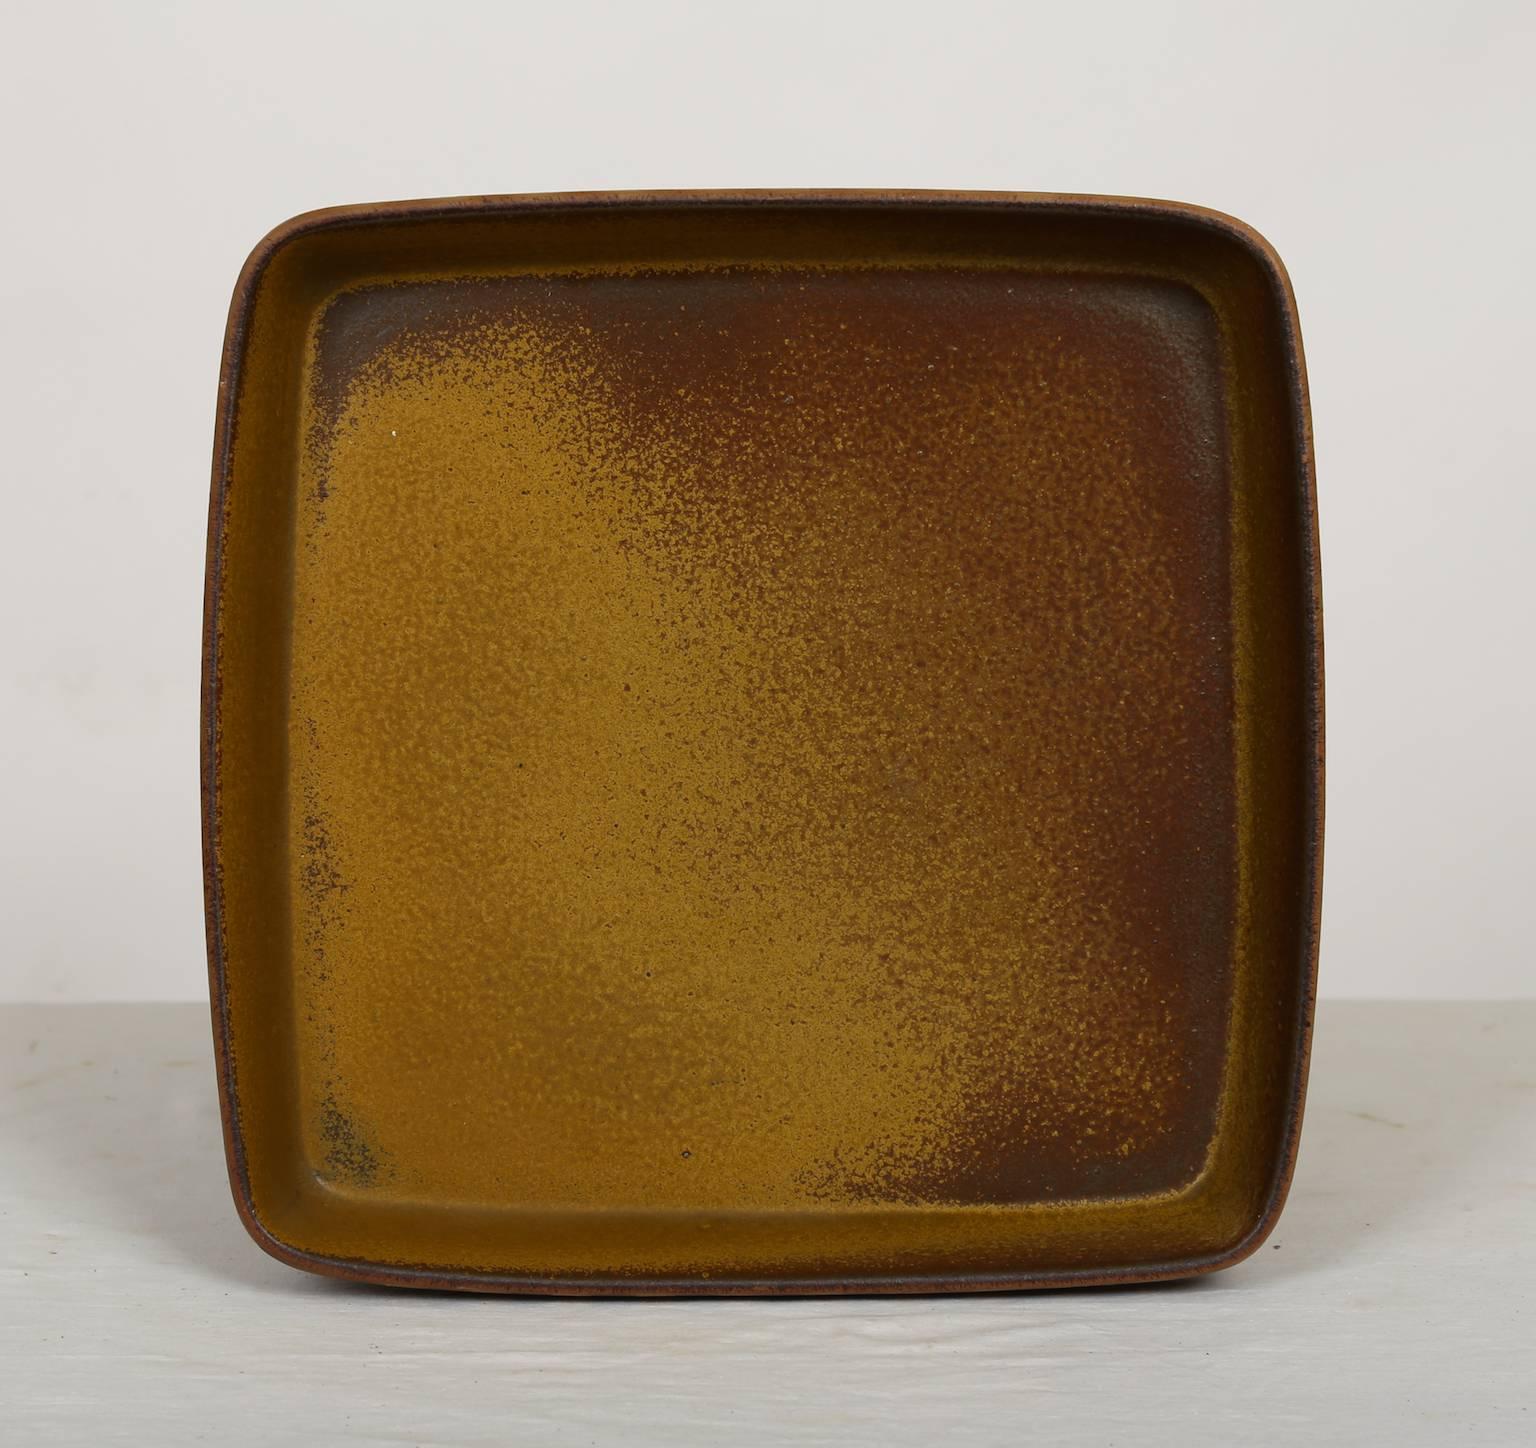 Large Square Shaped Ceramic Tray by Stig Lindberg, for Gustavsberg, Sweden In Good Condition For Sale In Malmo, SE